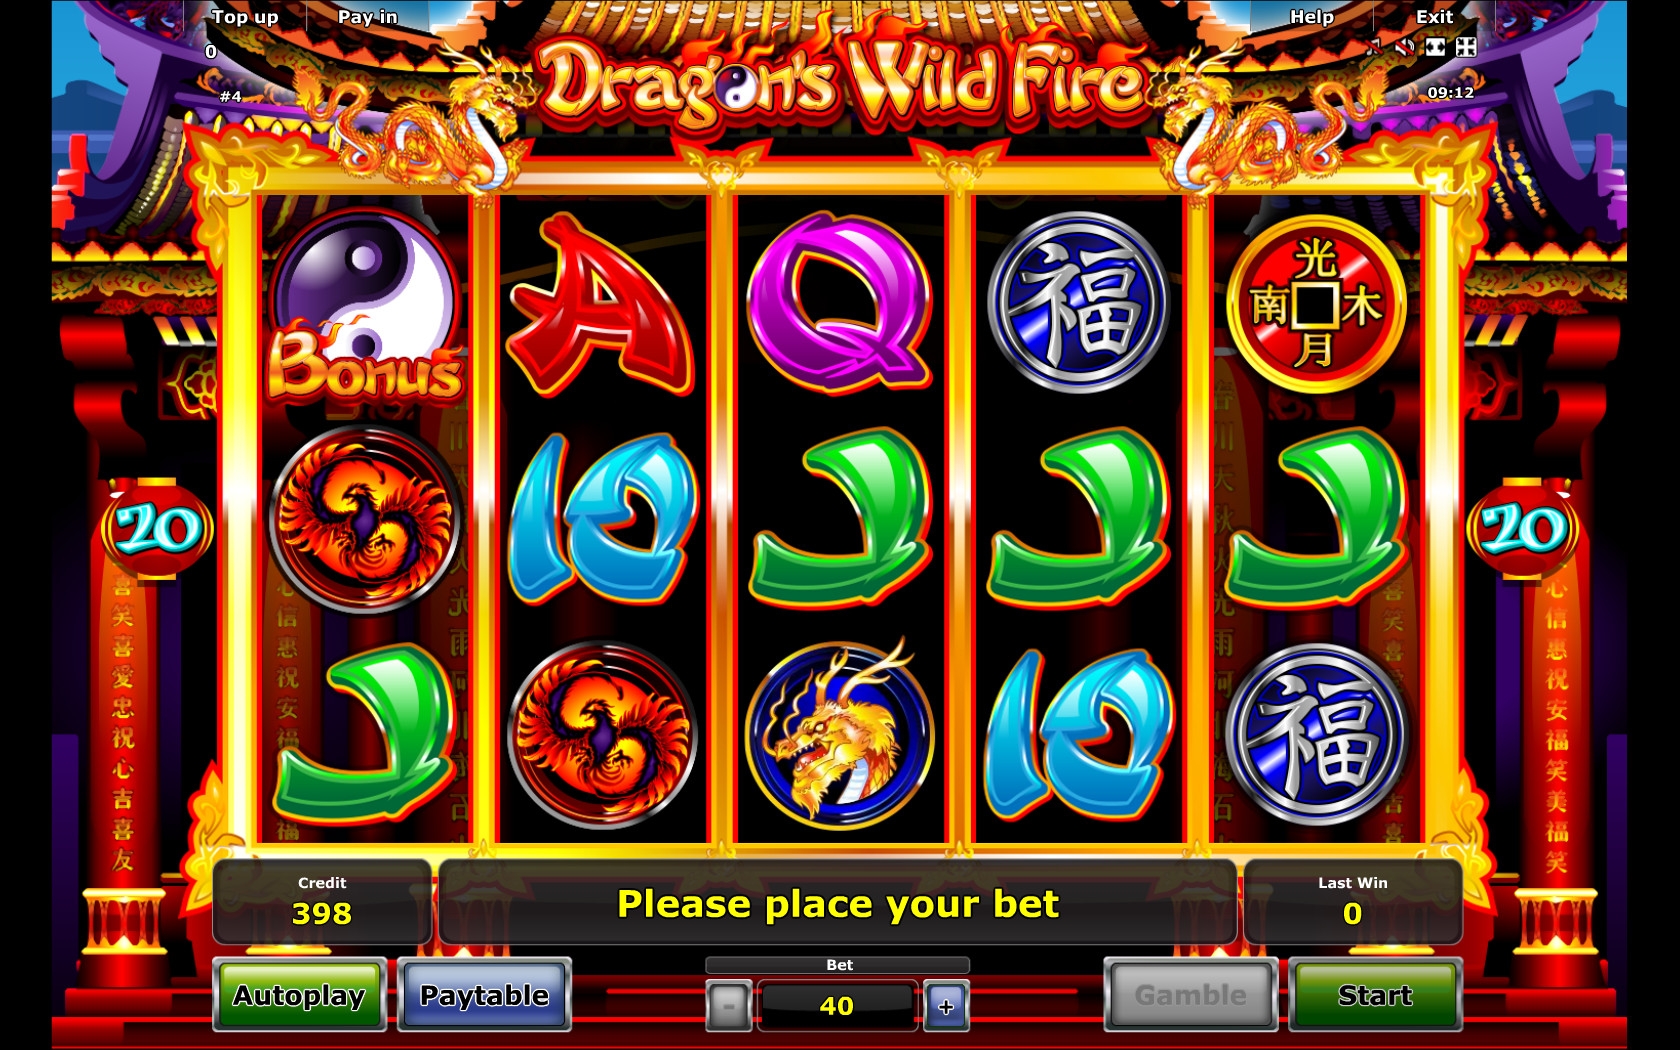 Dragon’s Wild Fire (Dragon’s Wild Fire) from category Slots